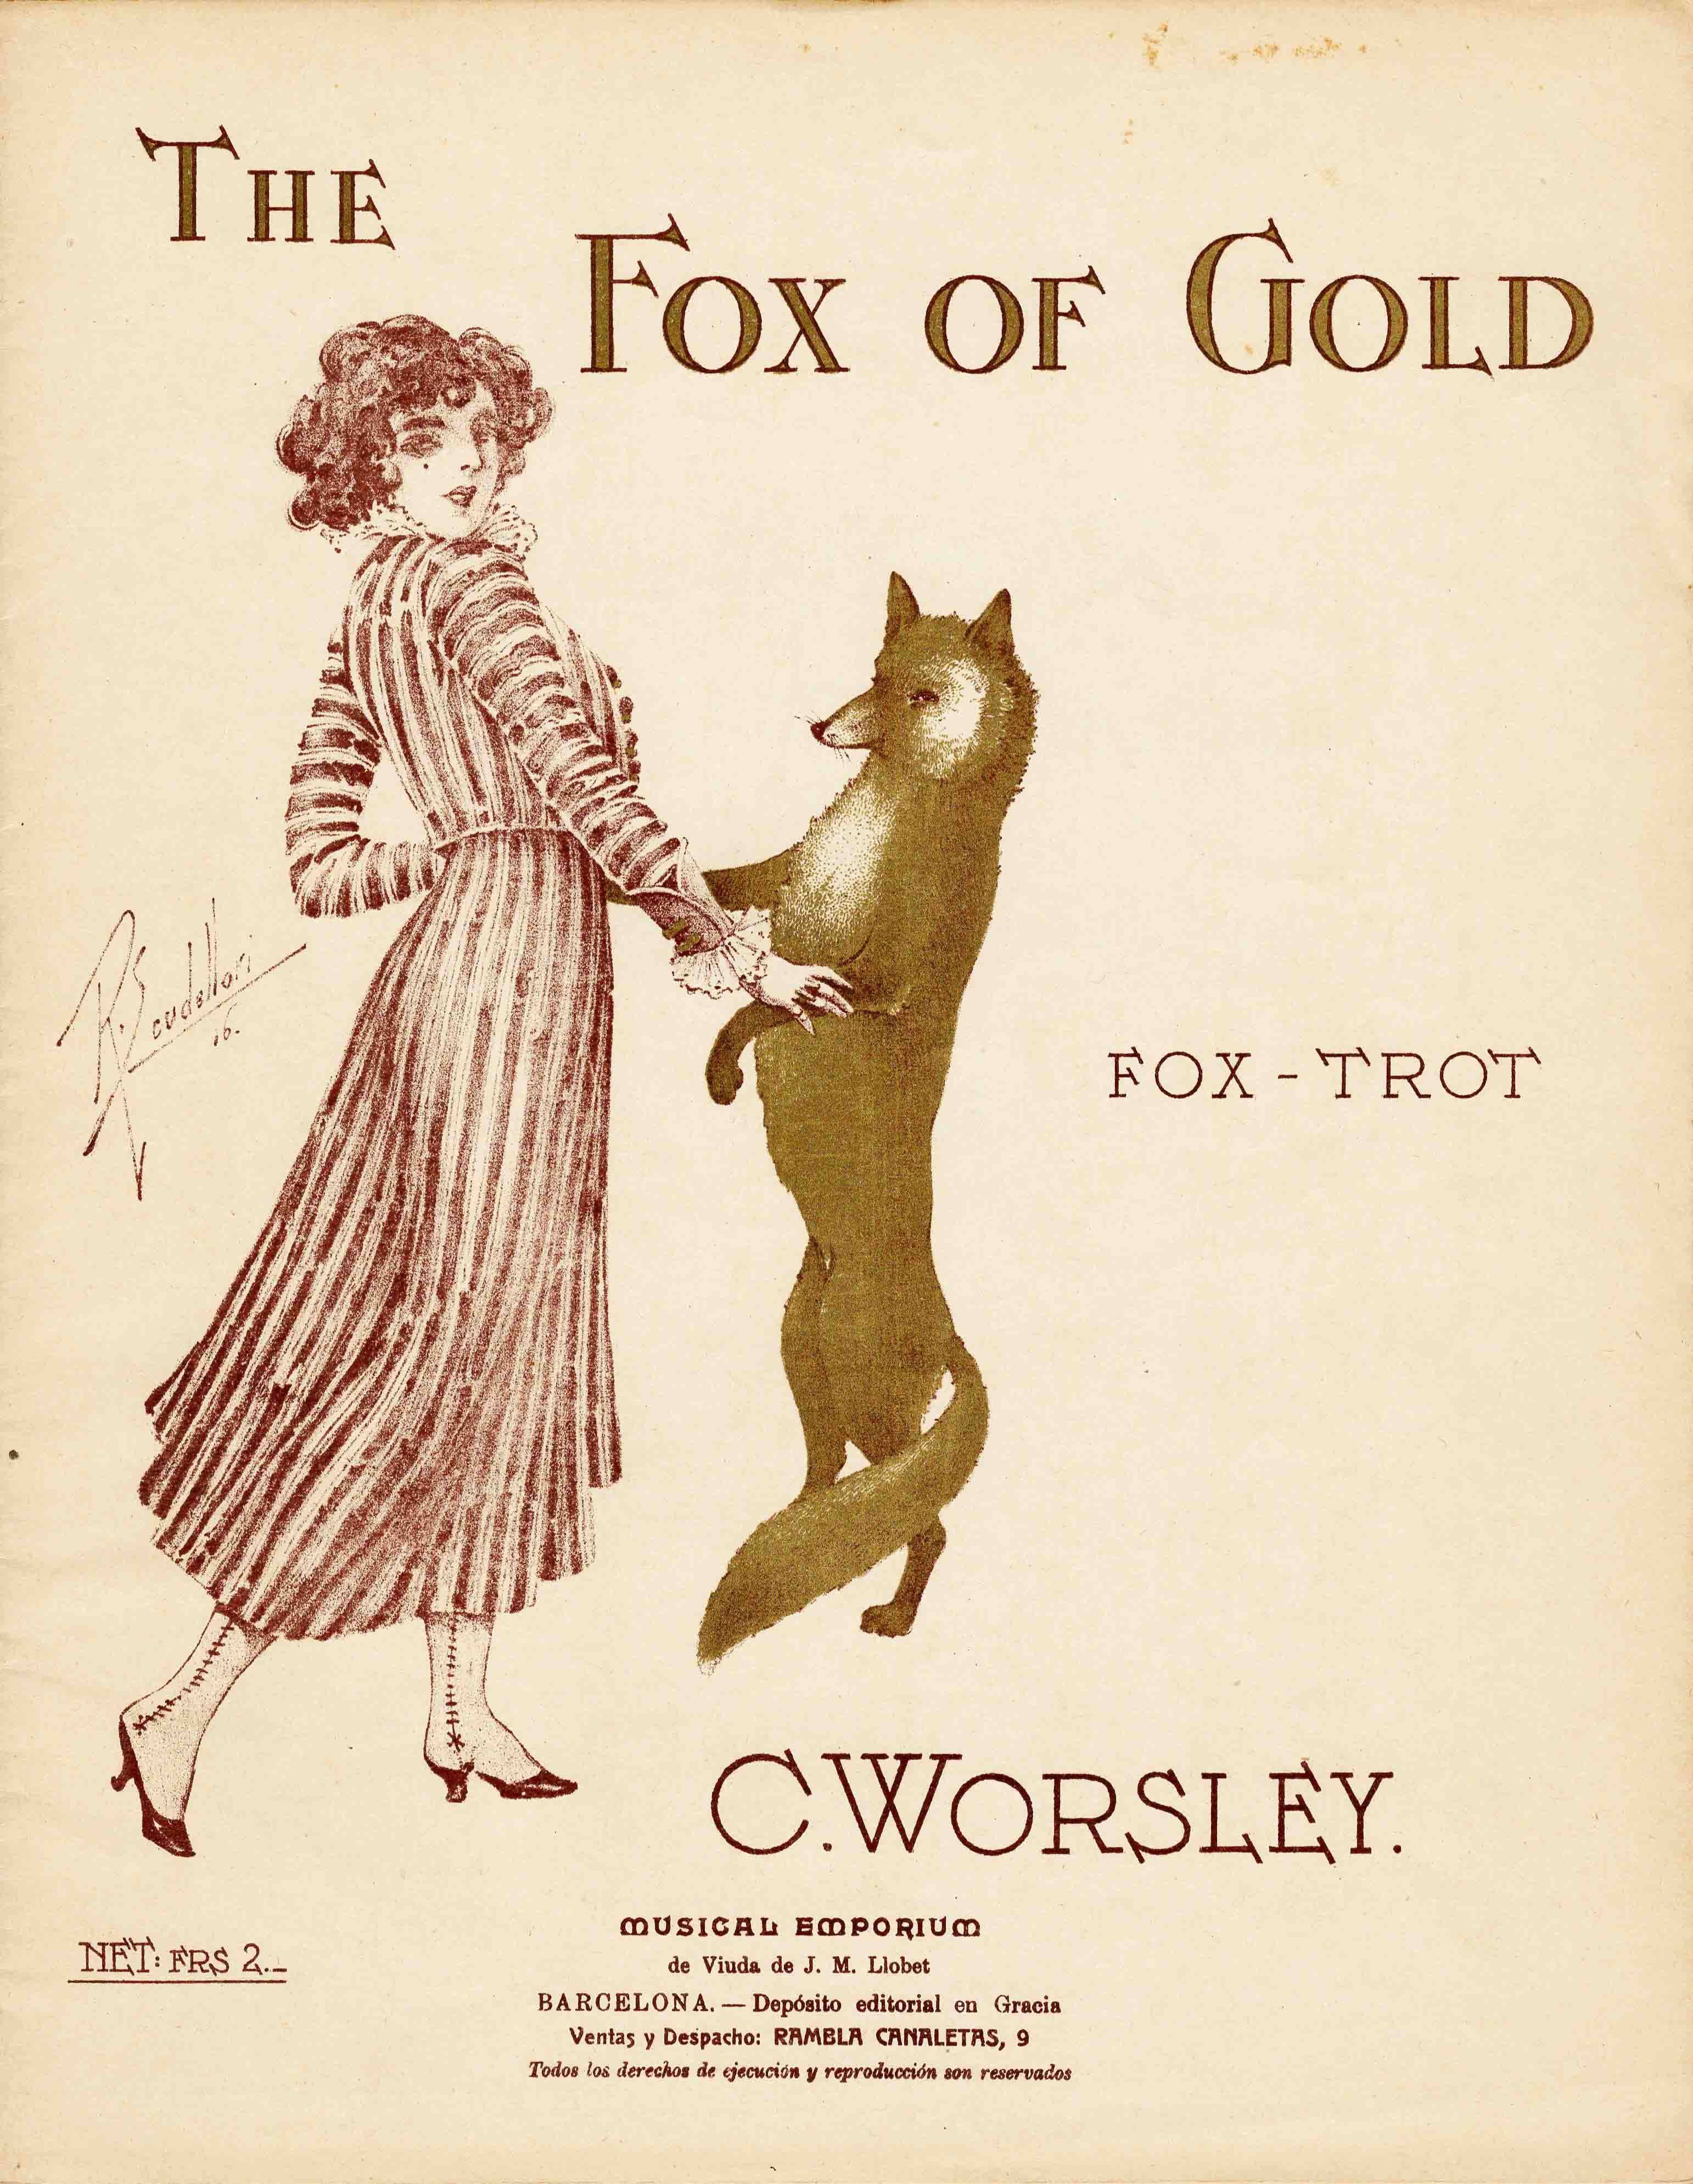 The Fox of Gold